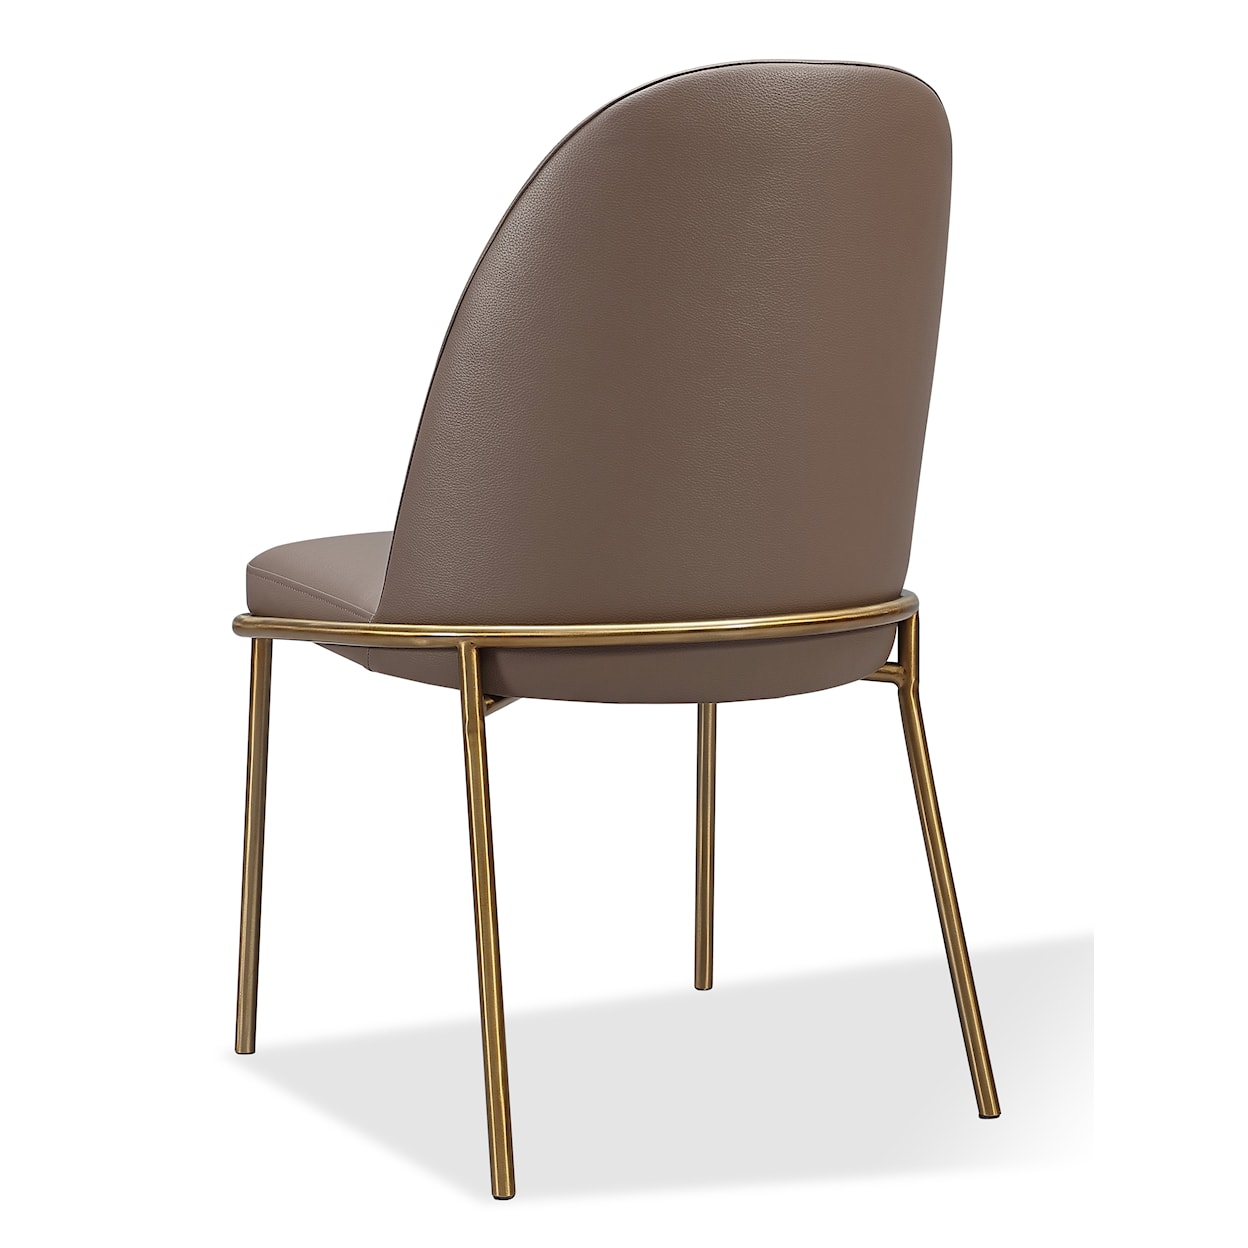 Modus International Doheny Leather Upholstered Metal Leg Dining Chair